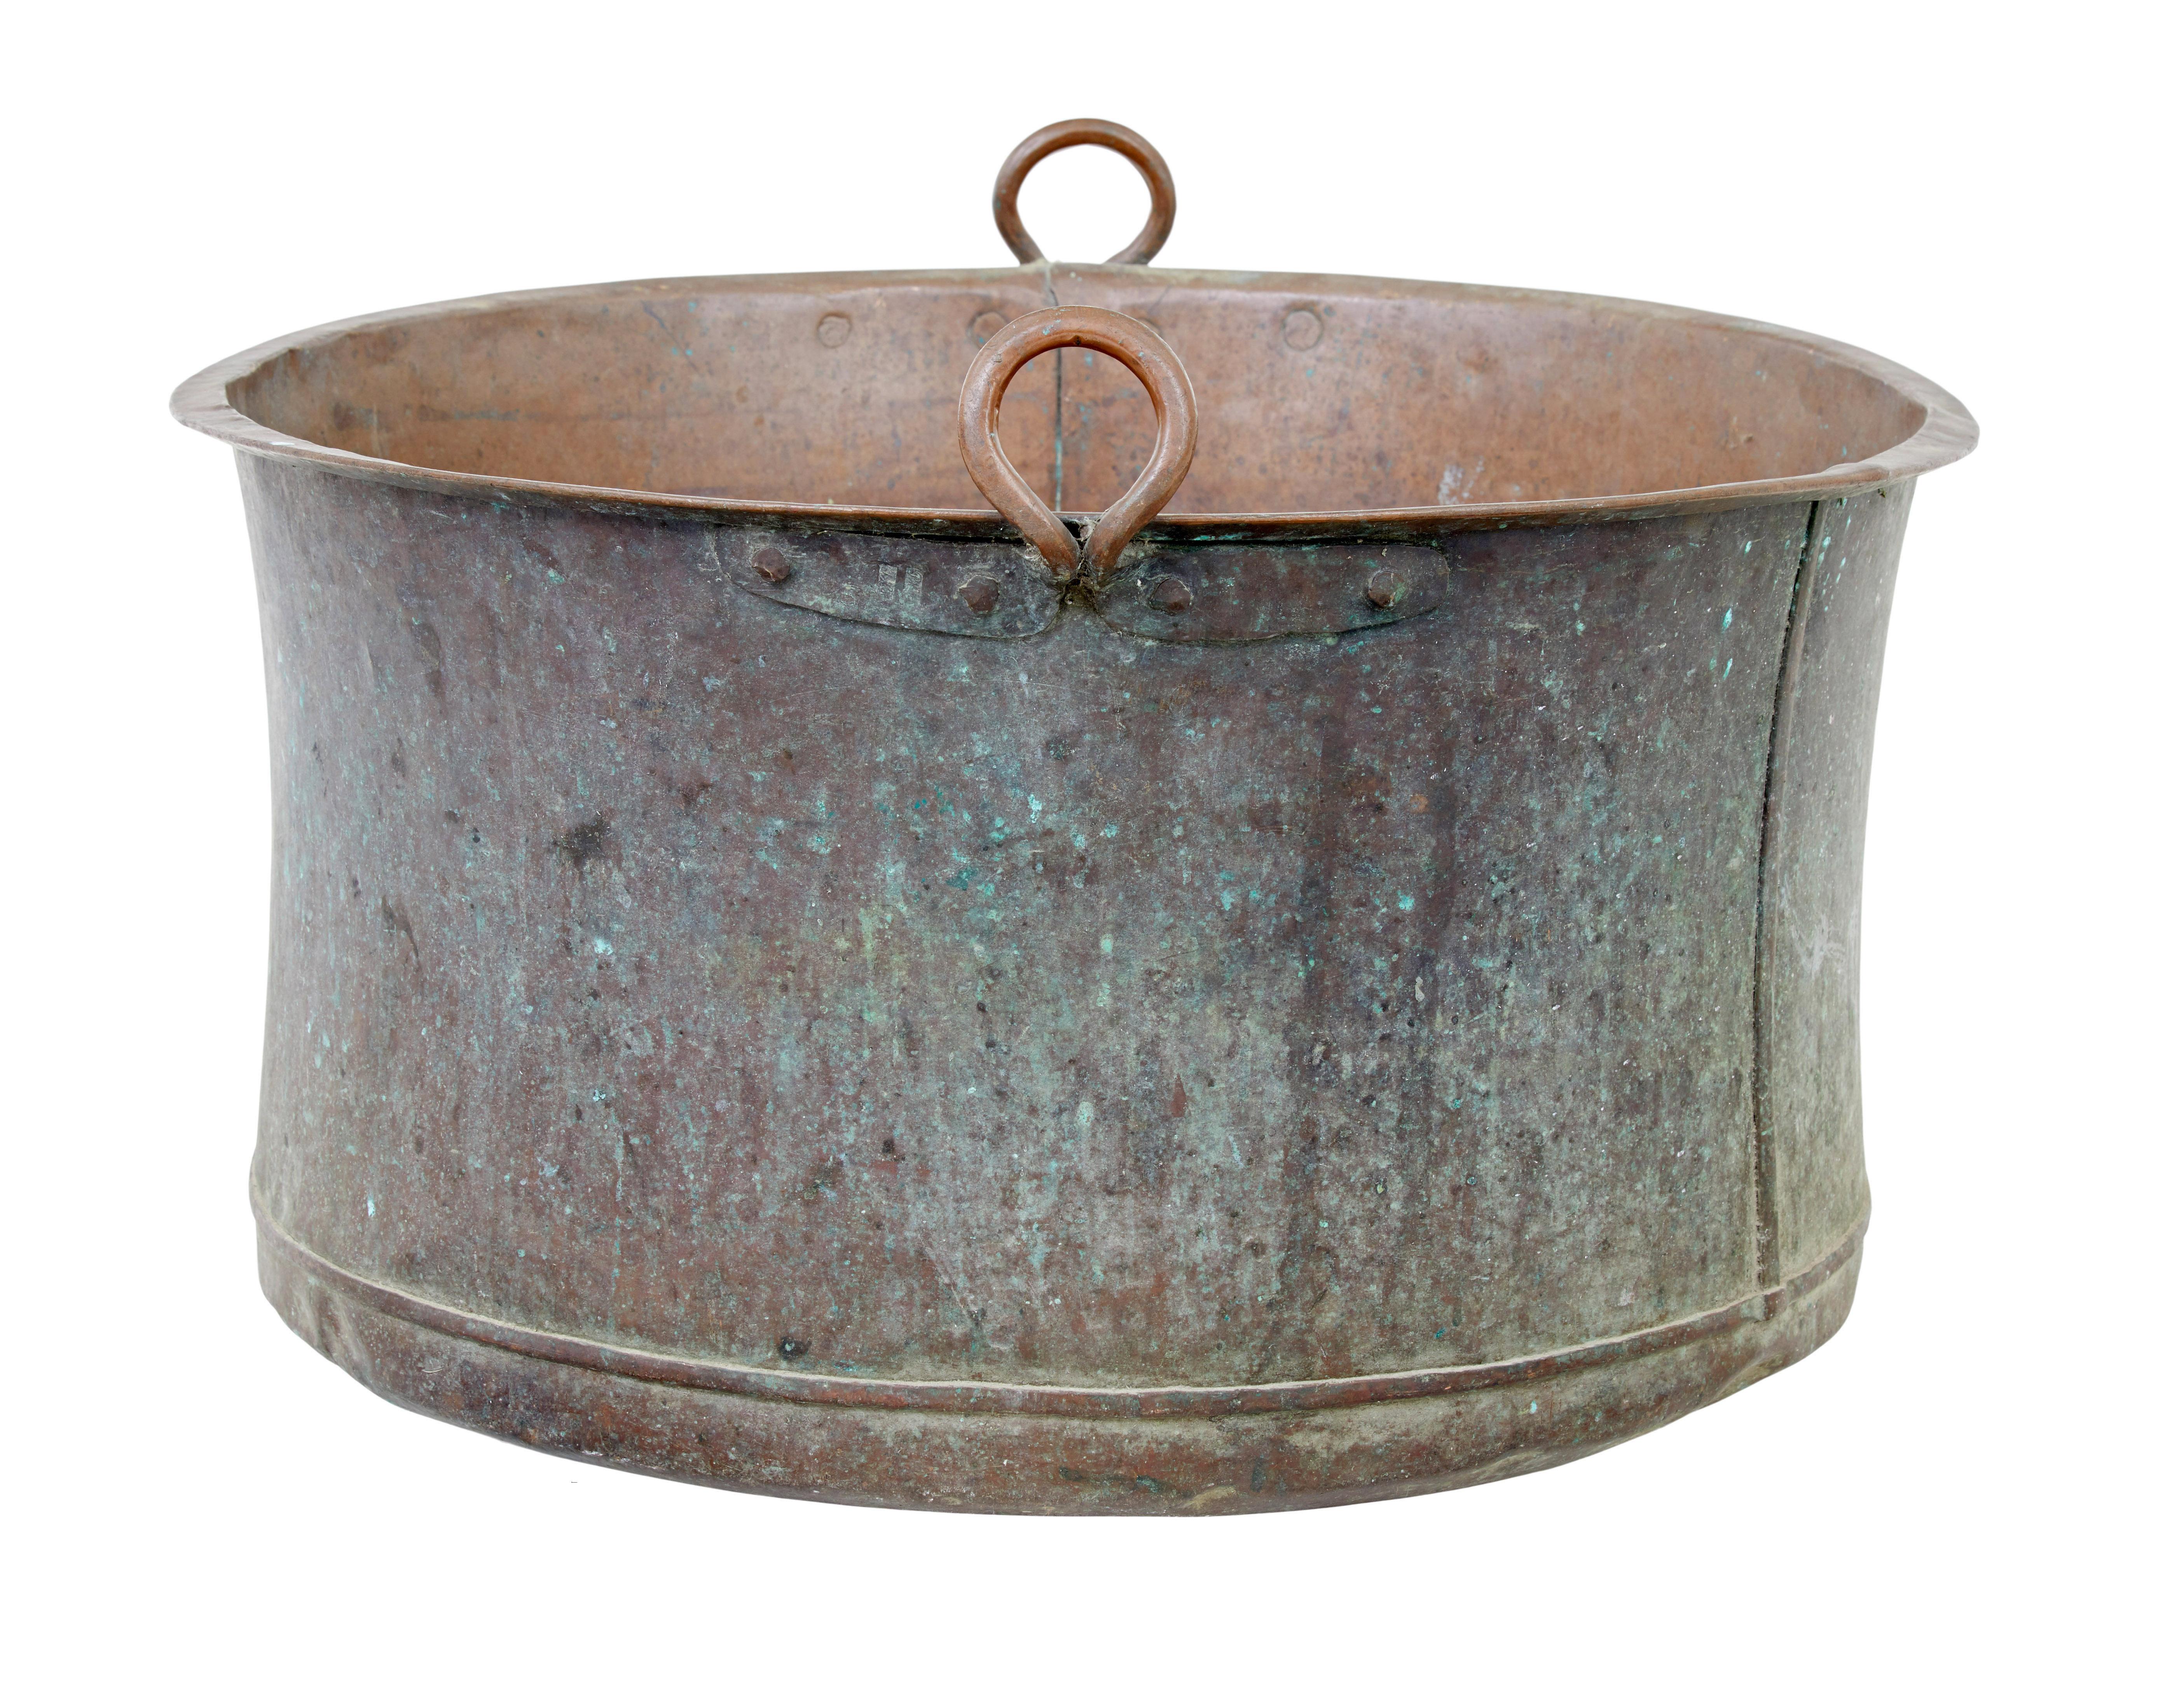 Large 19th century cooking pot with original patina circa 1880.

We are pleased to offer this large cooking pot, complete with it's original patina which has been many years in the making.

Used in large household kitchens of the 19th century, this